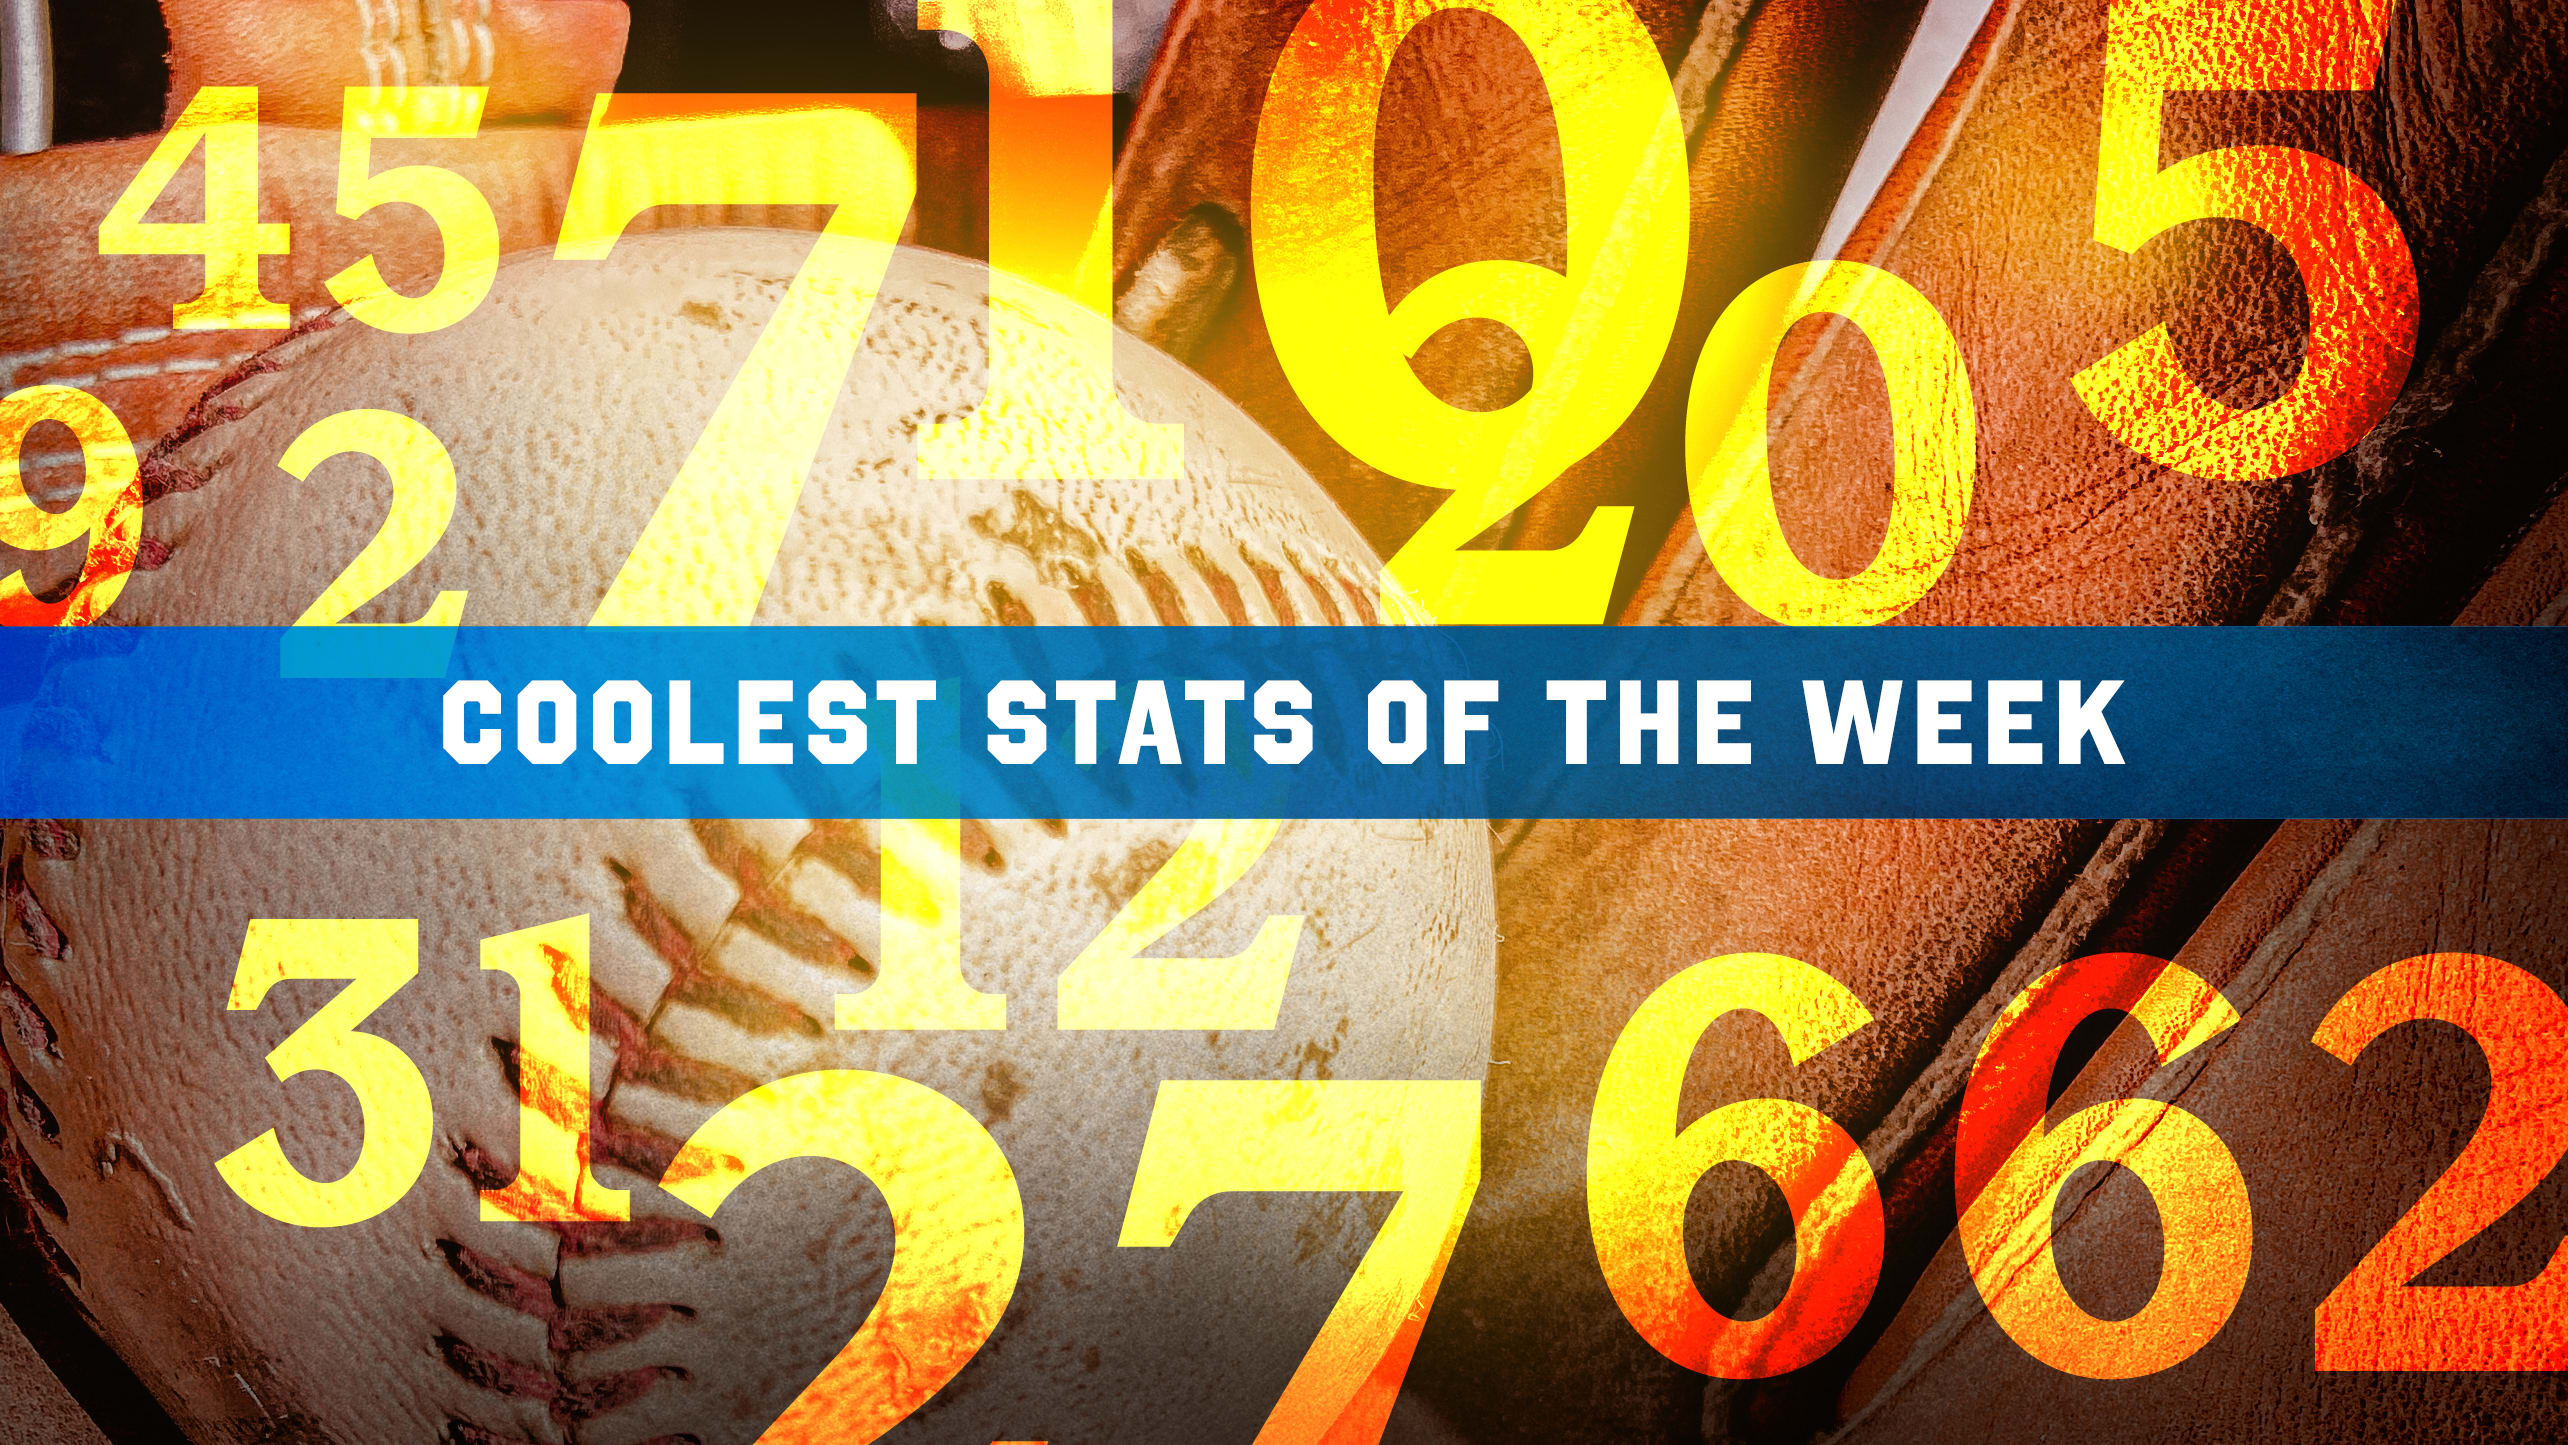 Stats of the week image